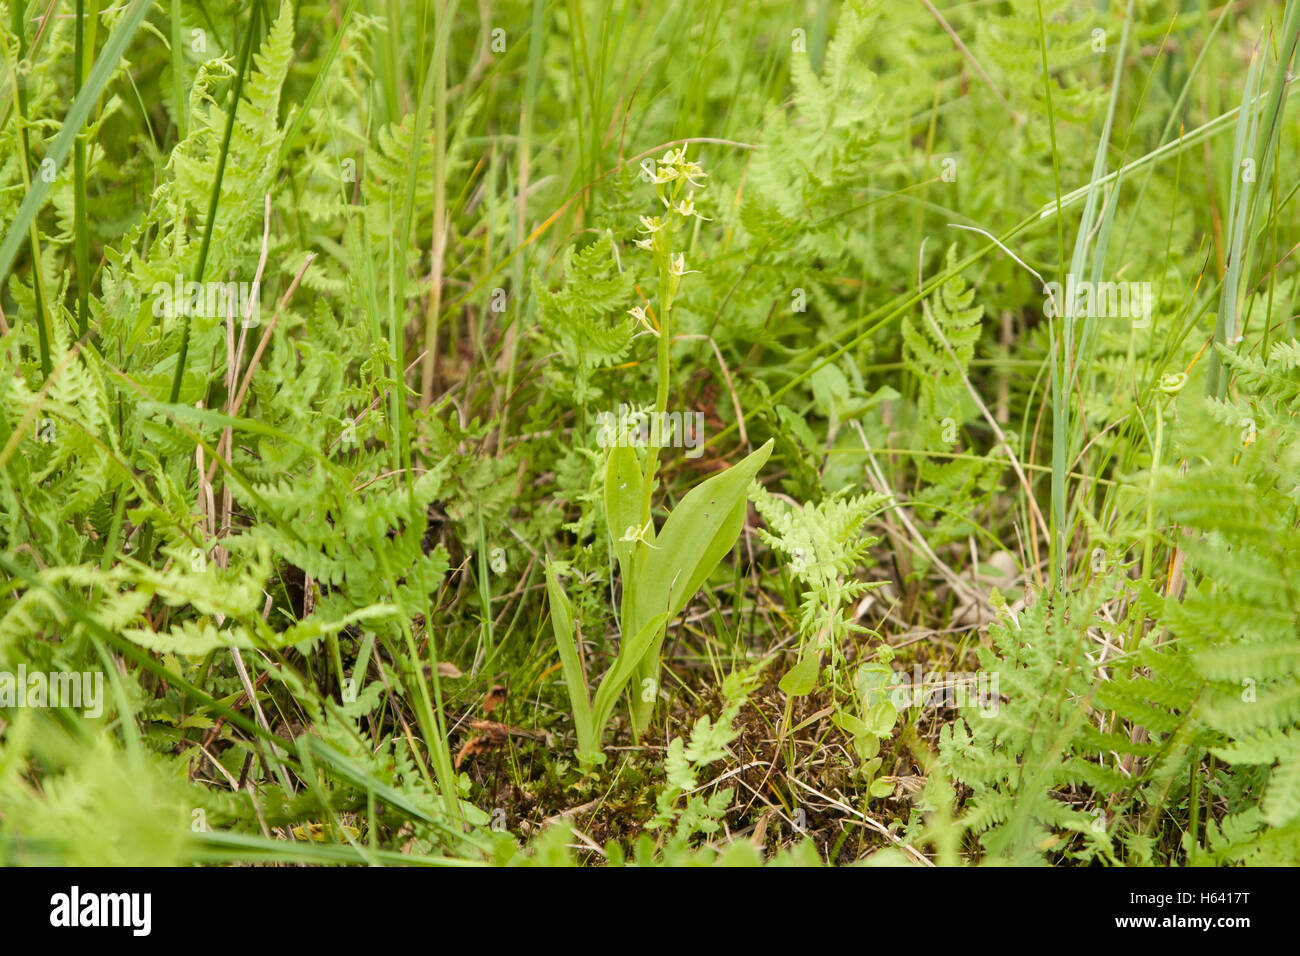 fen orchid (Liparis loeselii) showing plant growing in environment, Norfolk, England, UK Stock Photo